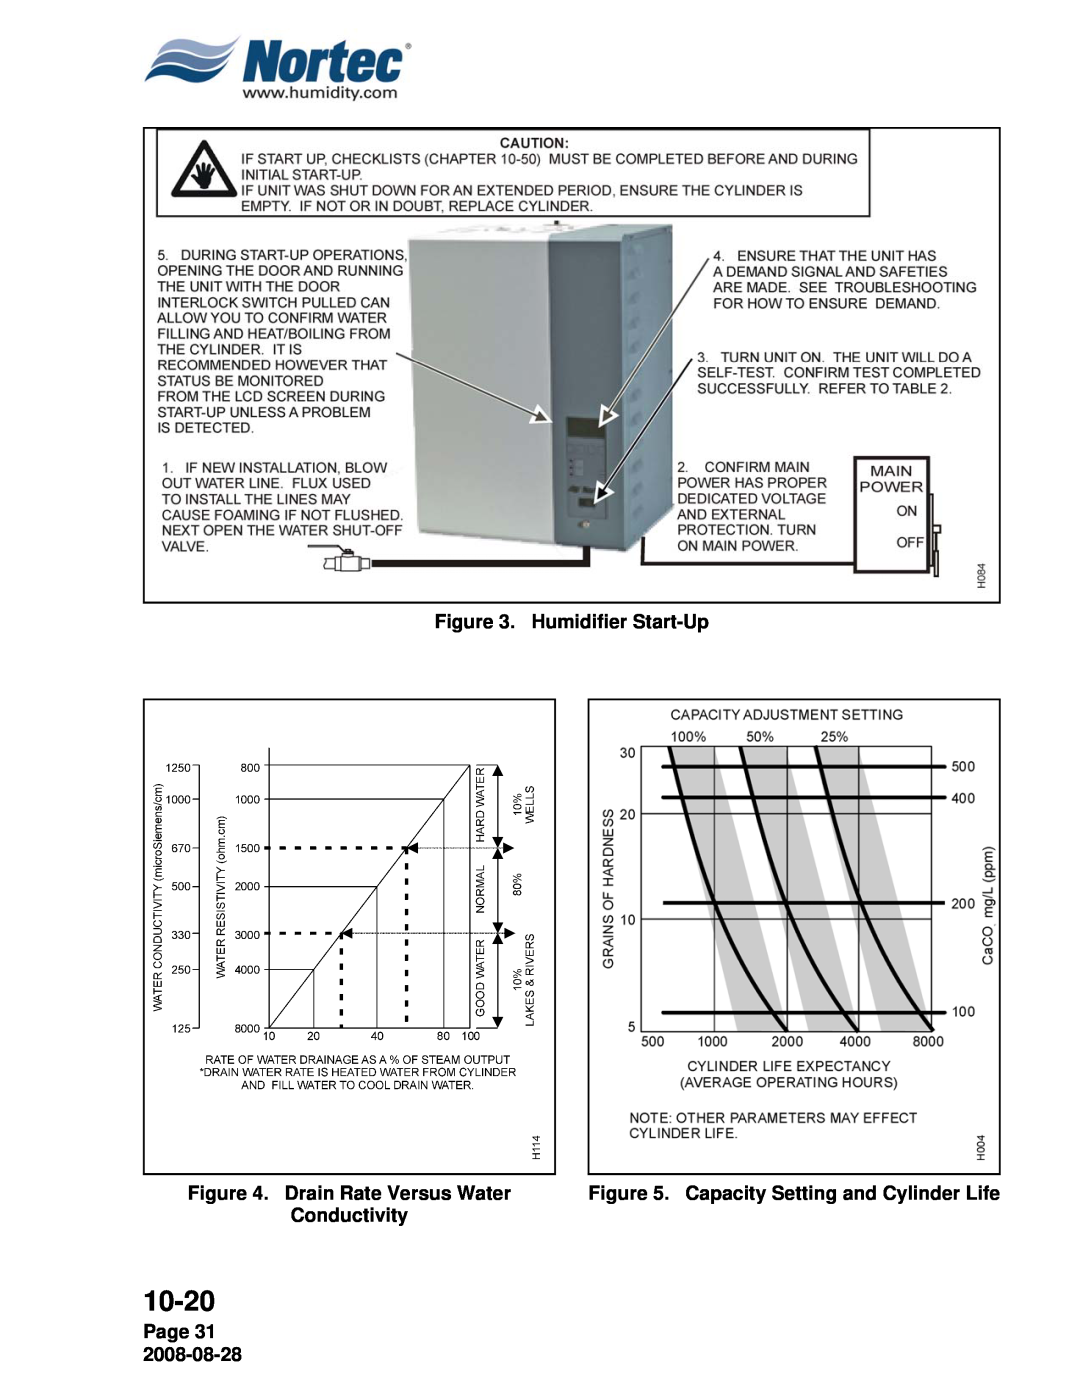 Nortec NH Series Humidifier Start-Up, Drain Rate Versus Water, Capacity Setting and Cylinder Life, Page 31, 10-20 